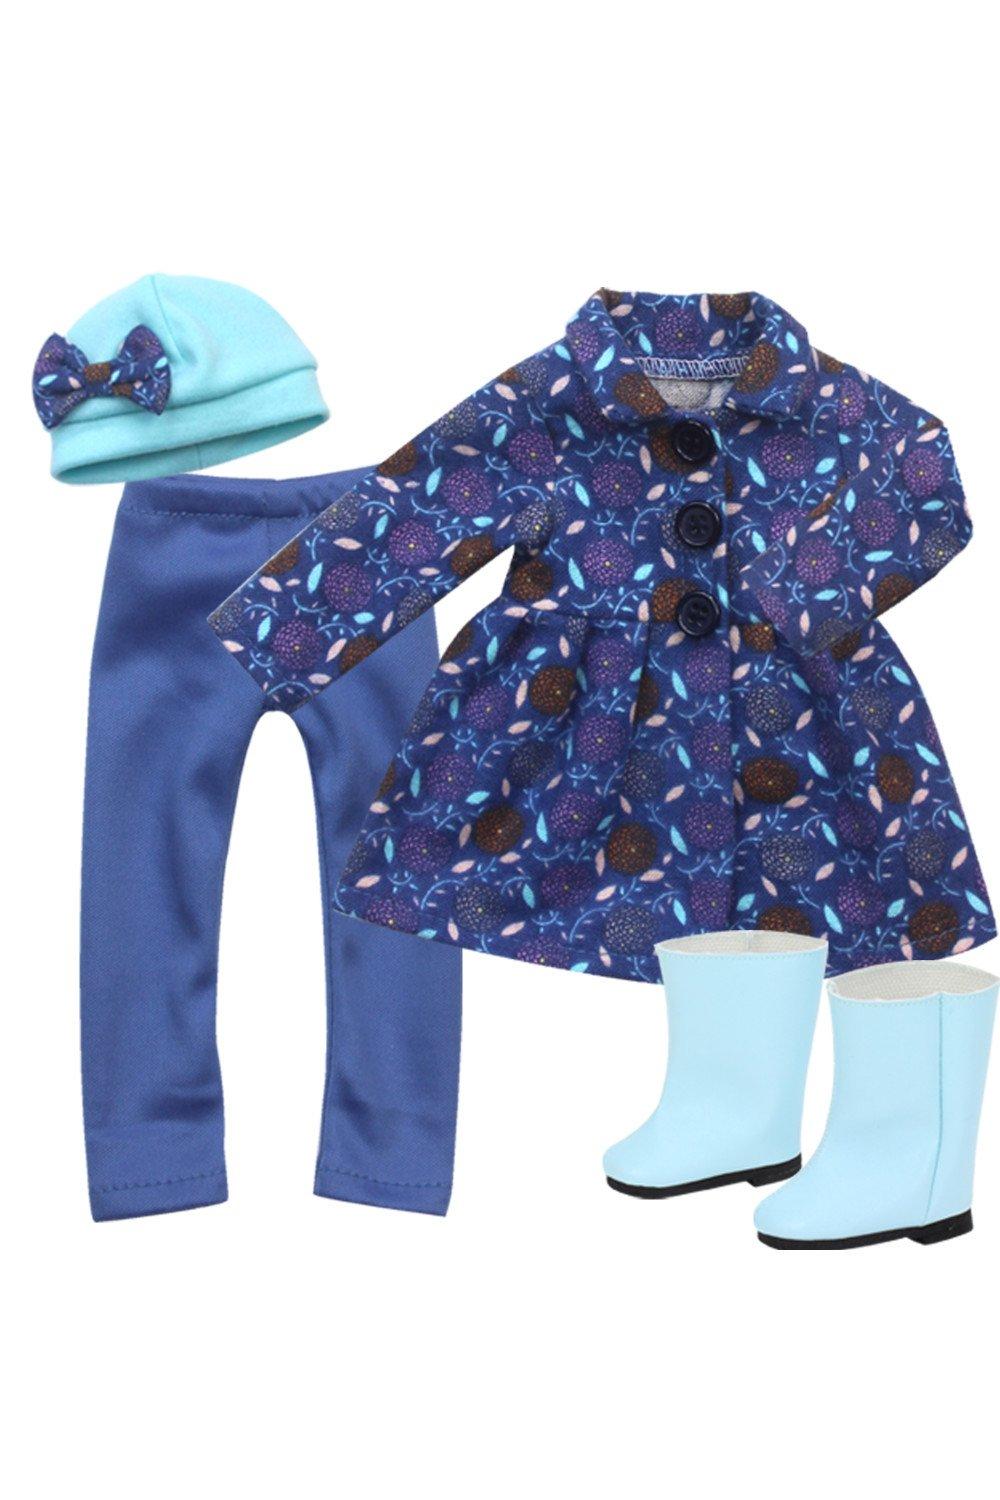 Sophia’s 4 Piece Blue 15" Baby Doll Outfit & Doll Shoes Set